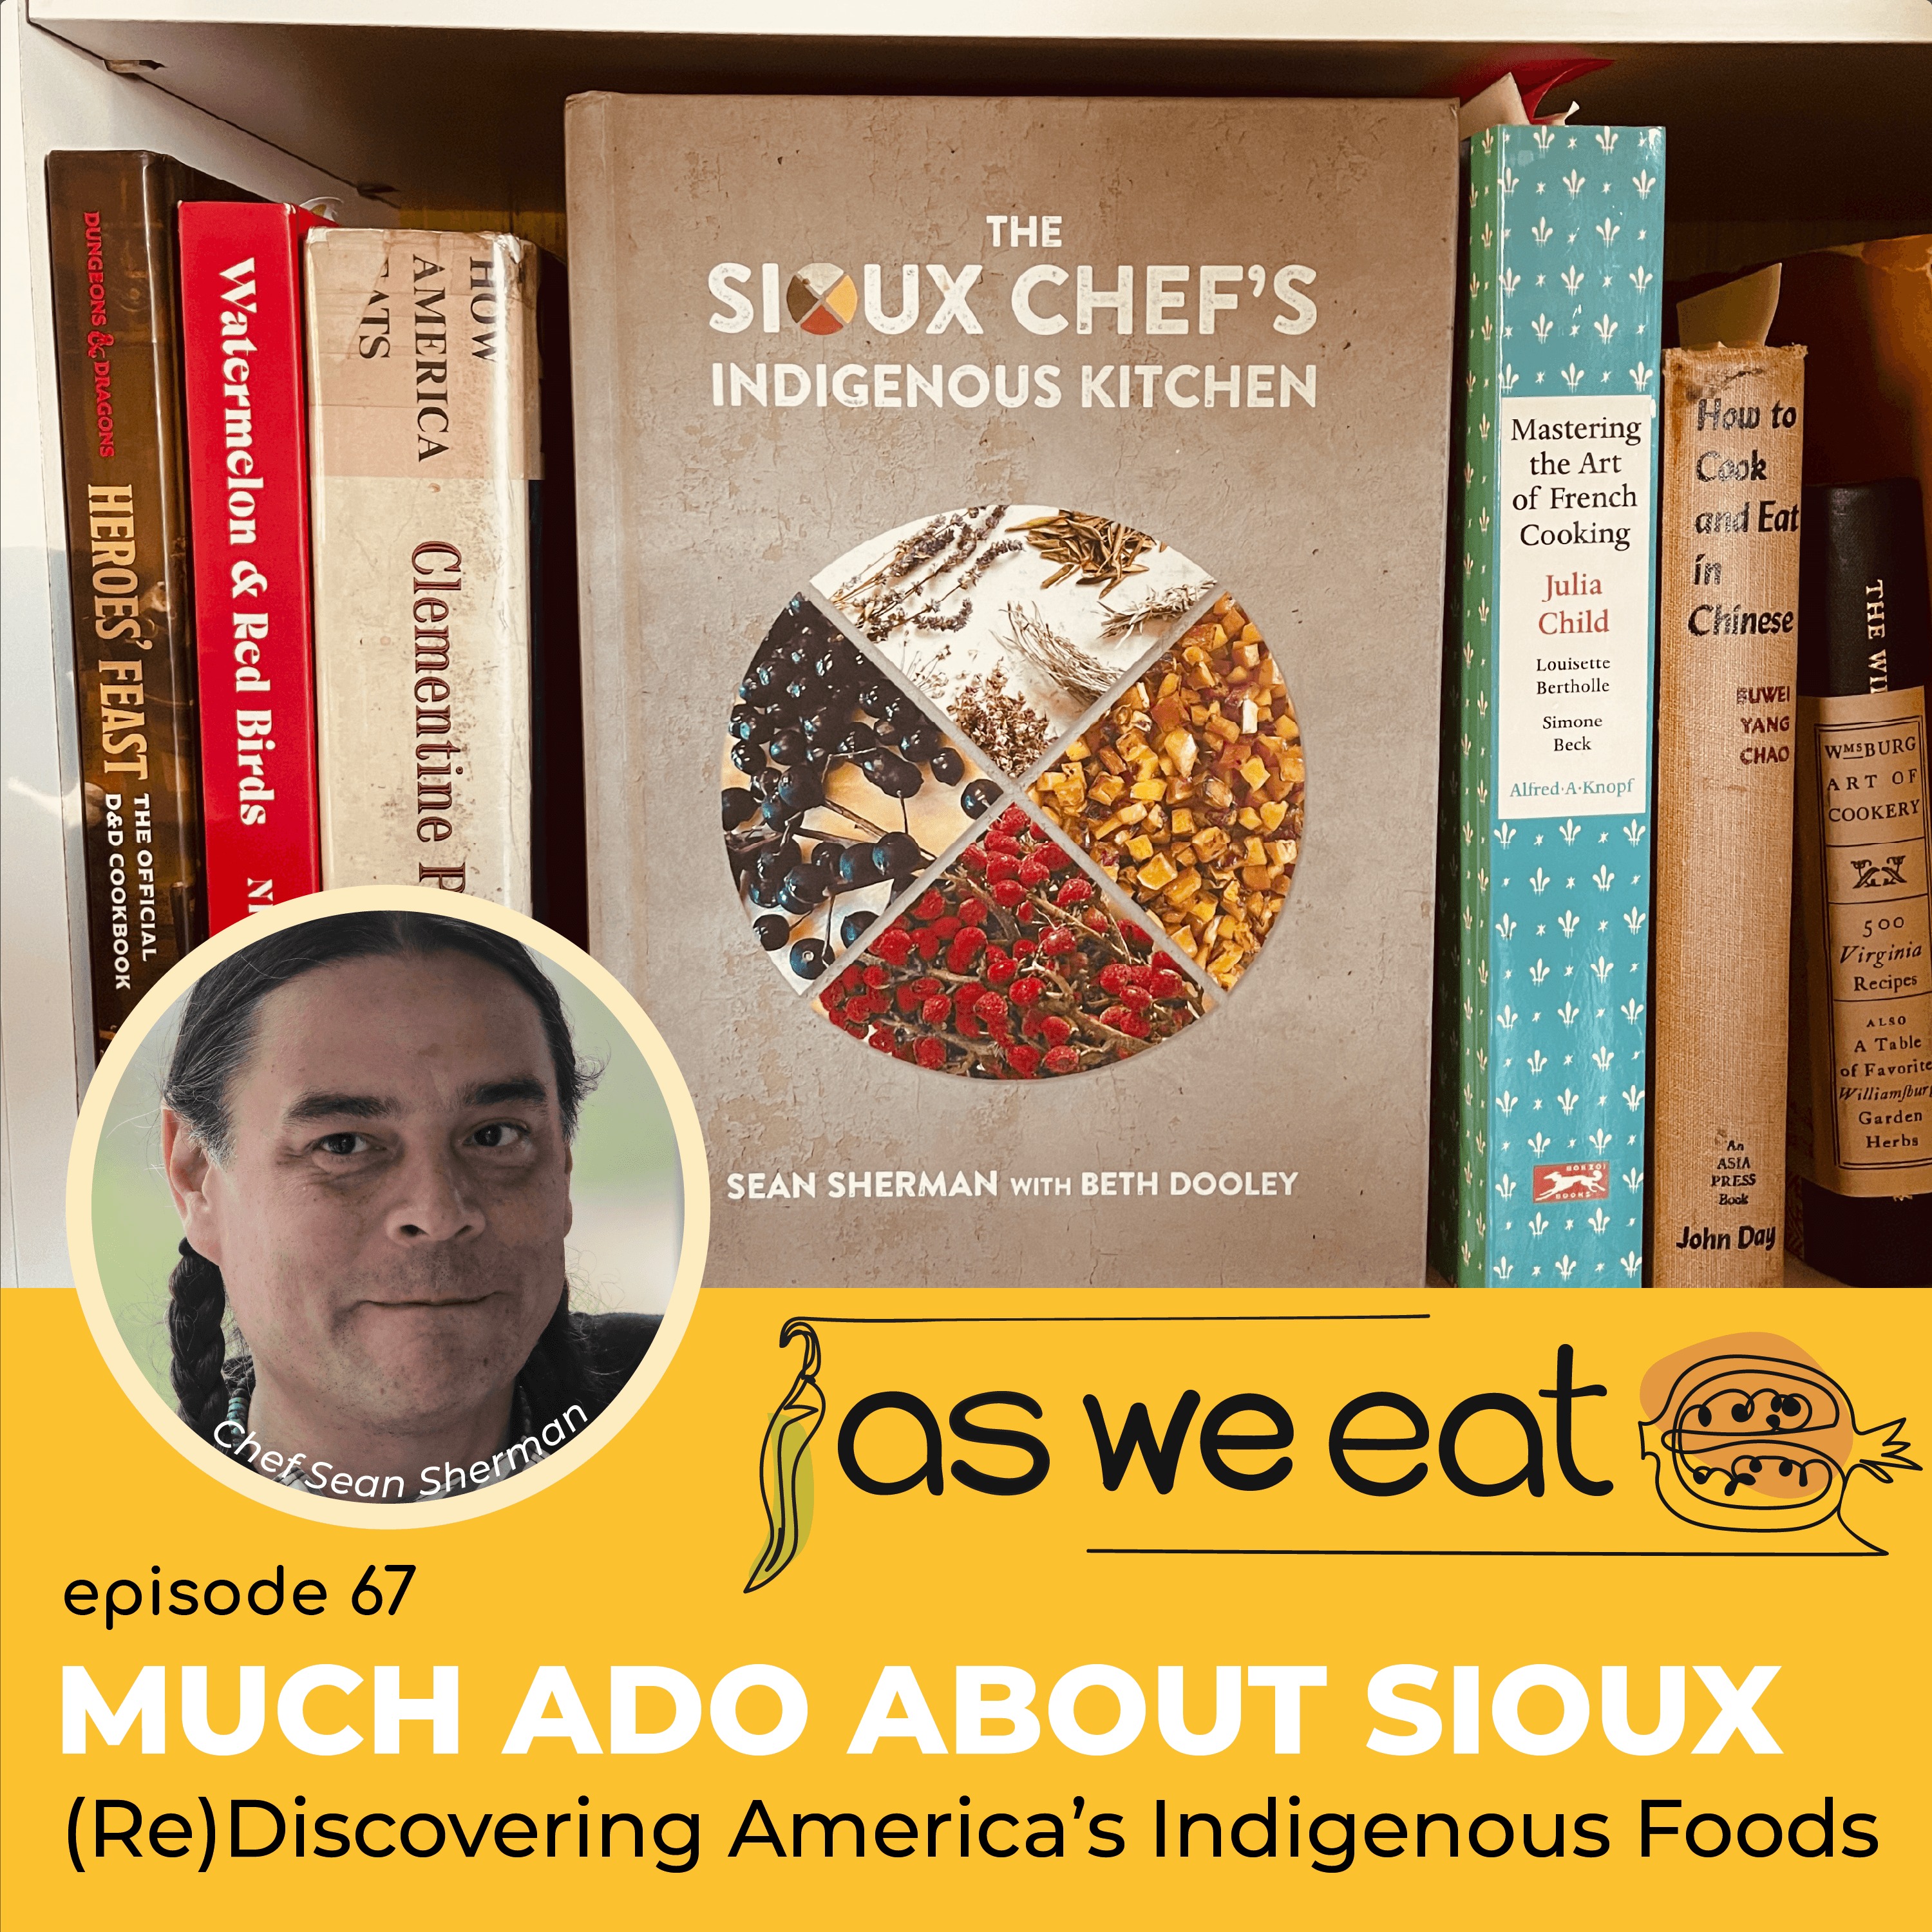 EP 67 Much Ado about Sioux: (Re)discovering America’s indigenous foods with Chef Sean Sherman